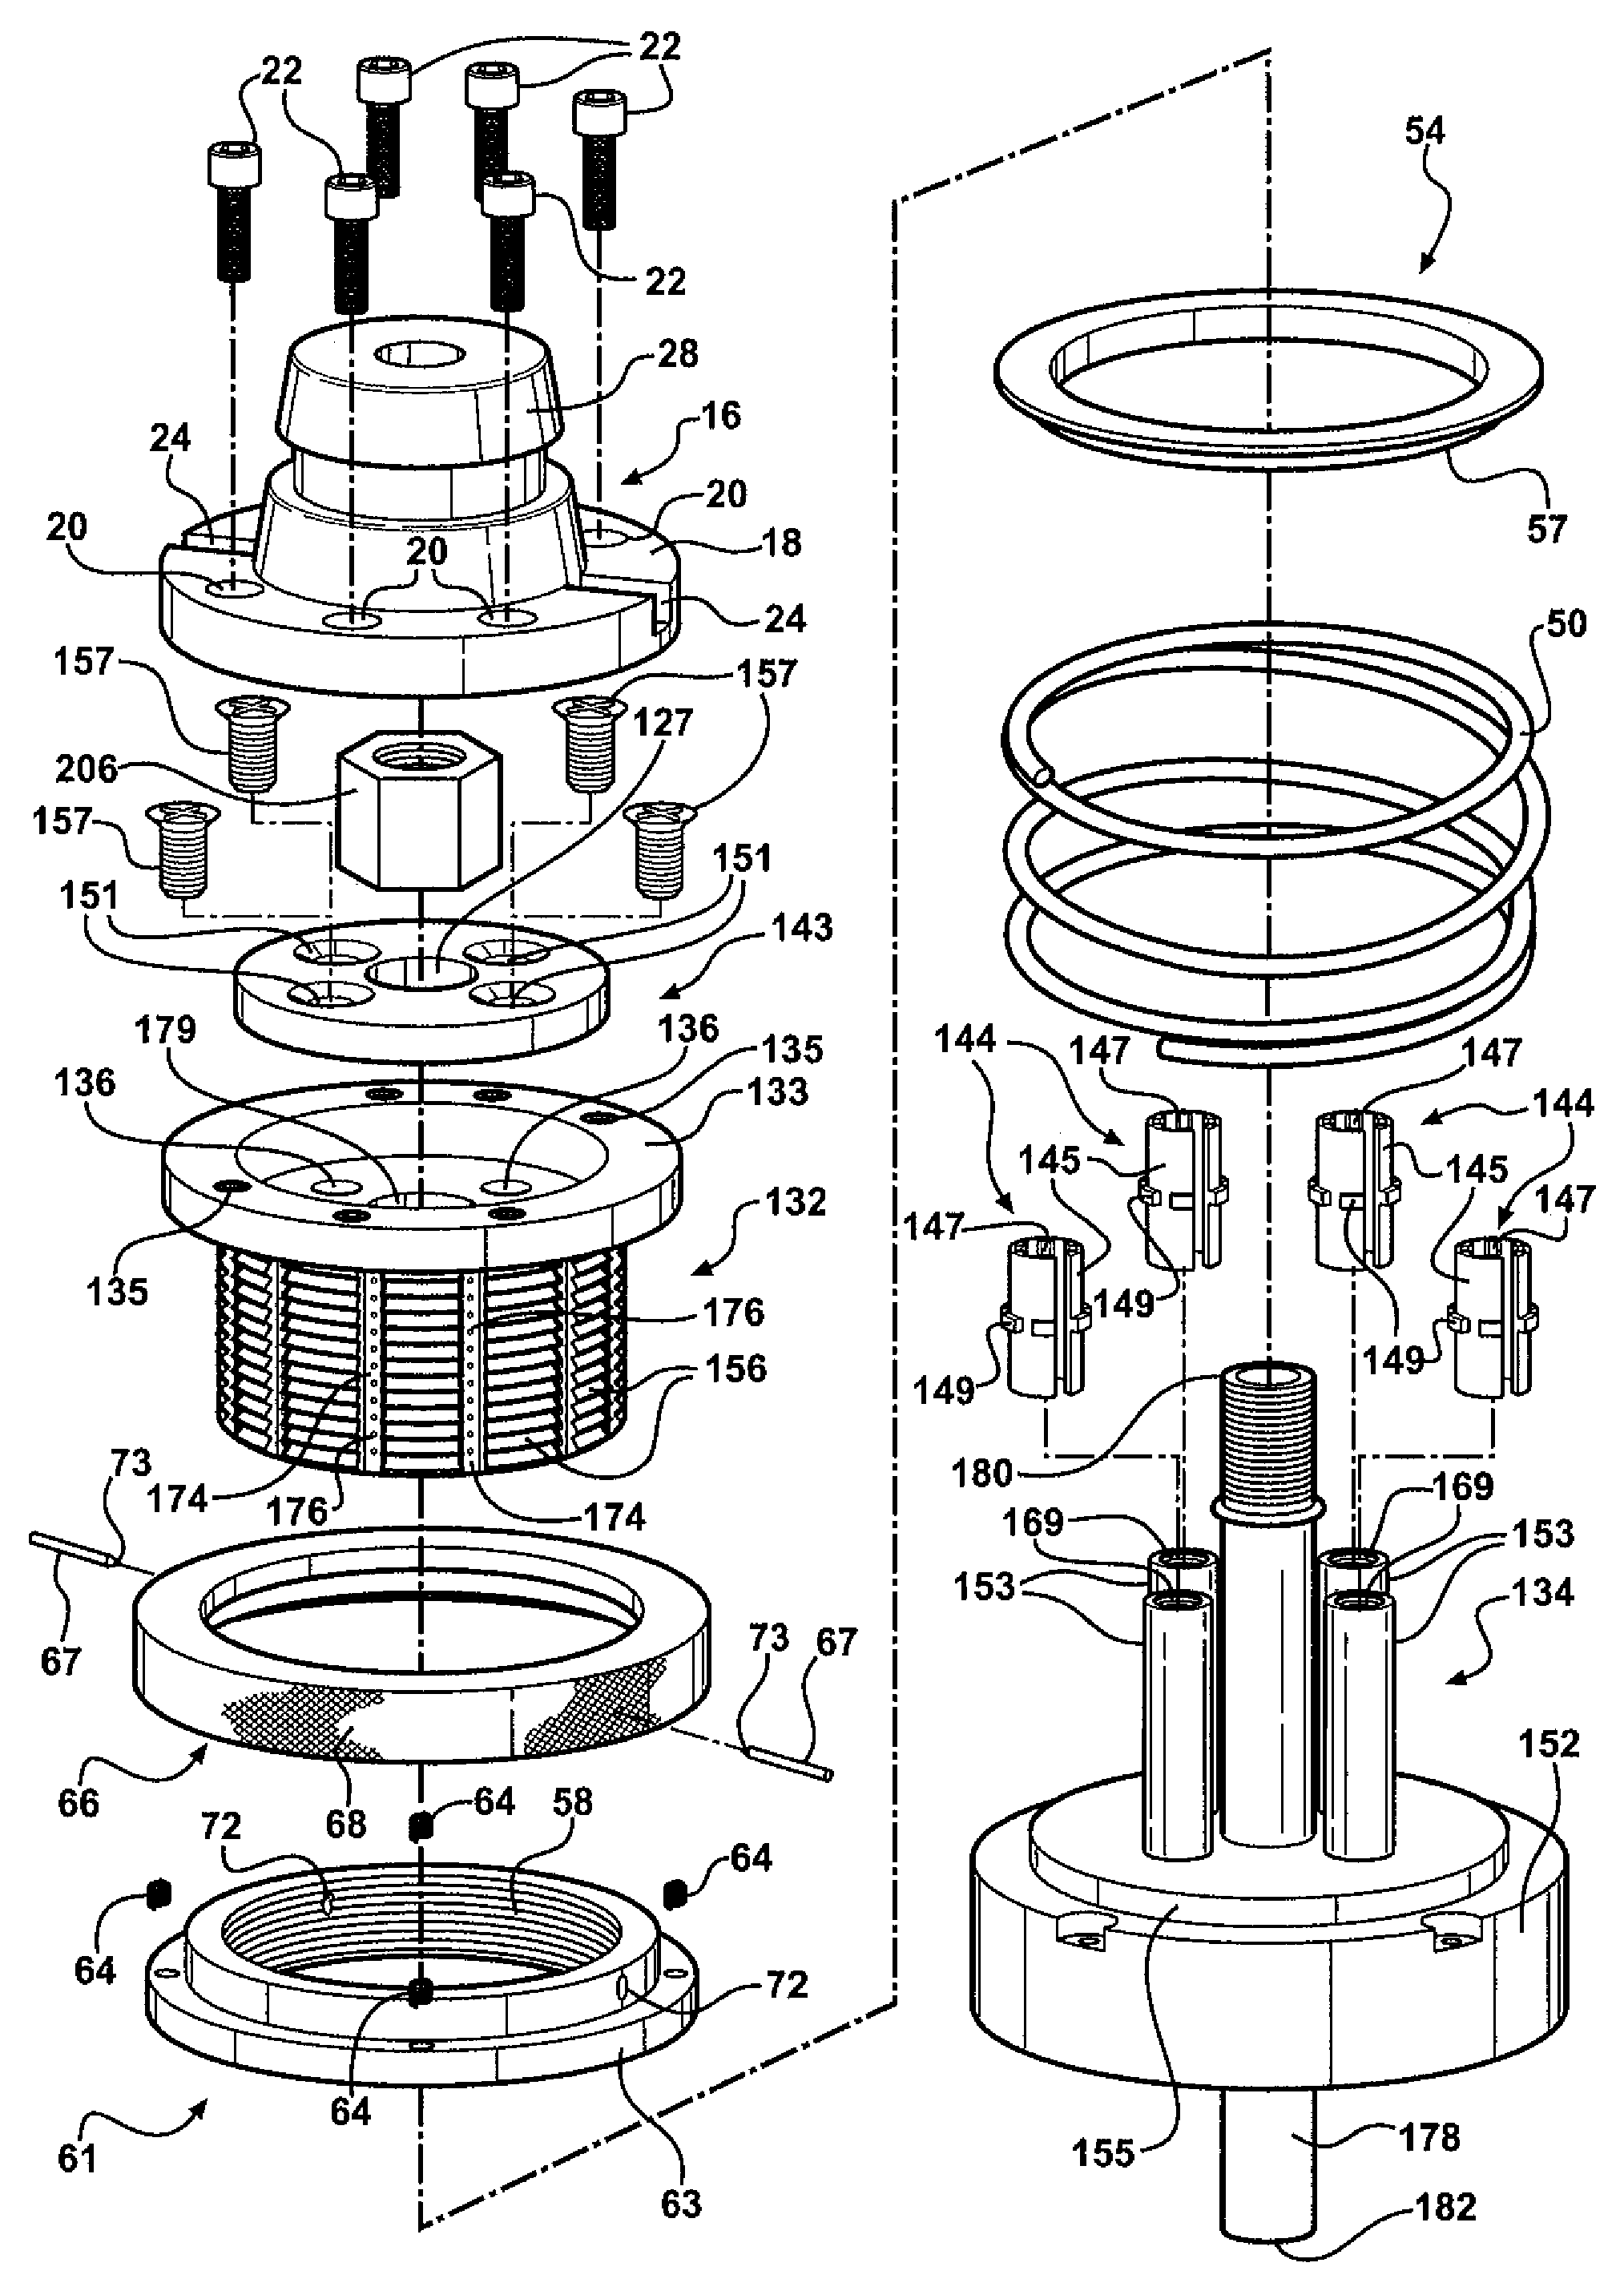 Capping device with bearing mechanism having a plurality of bearing members between a drive member and a capper body